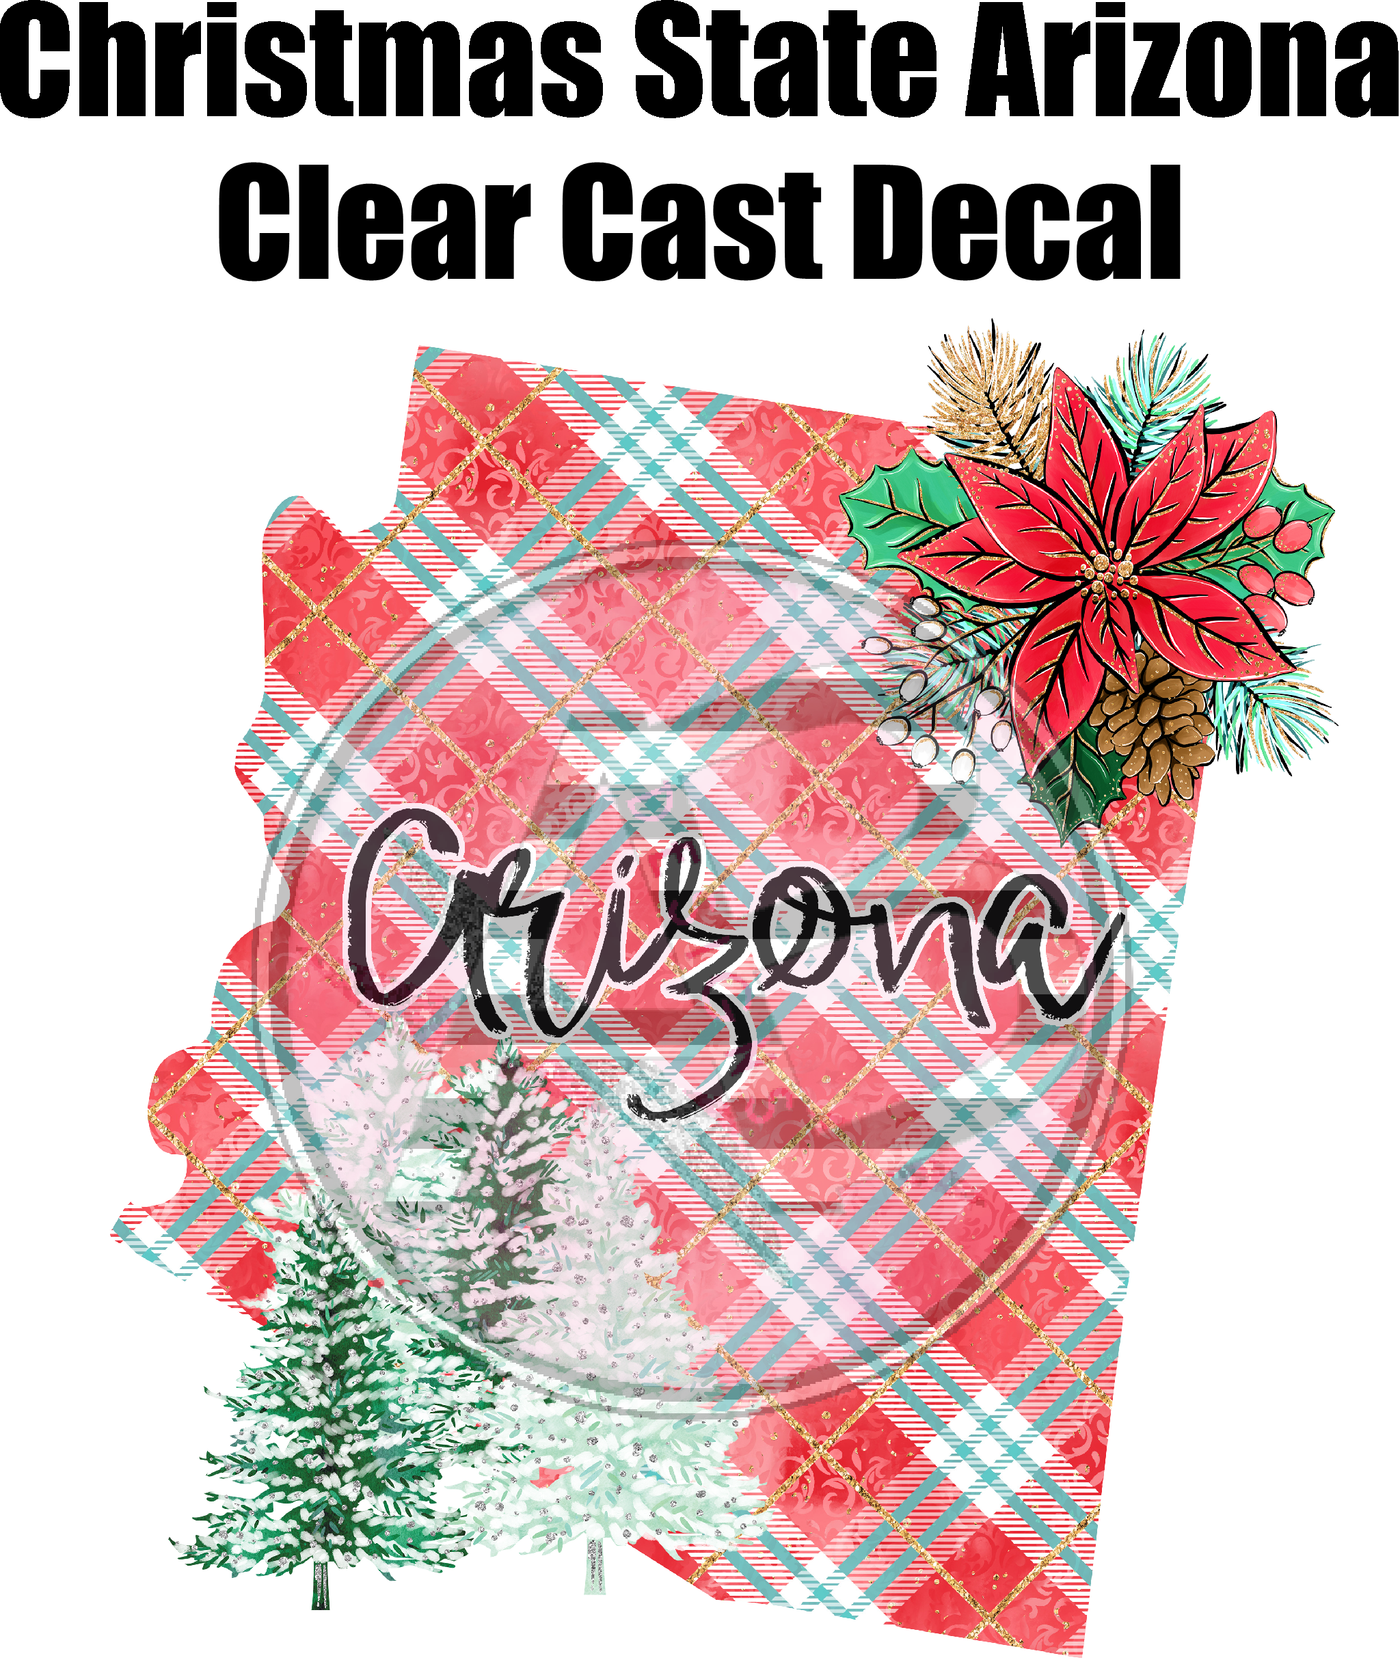 Christmas State Arizona - Clear Cast Decal